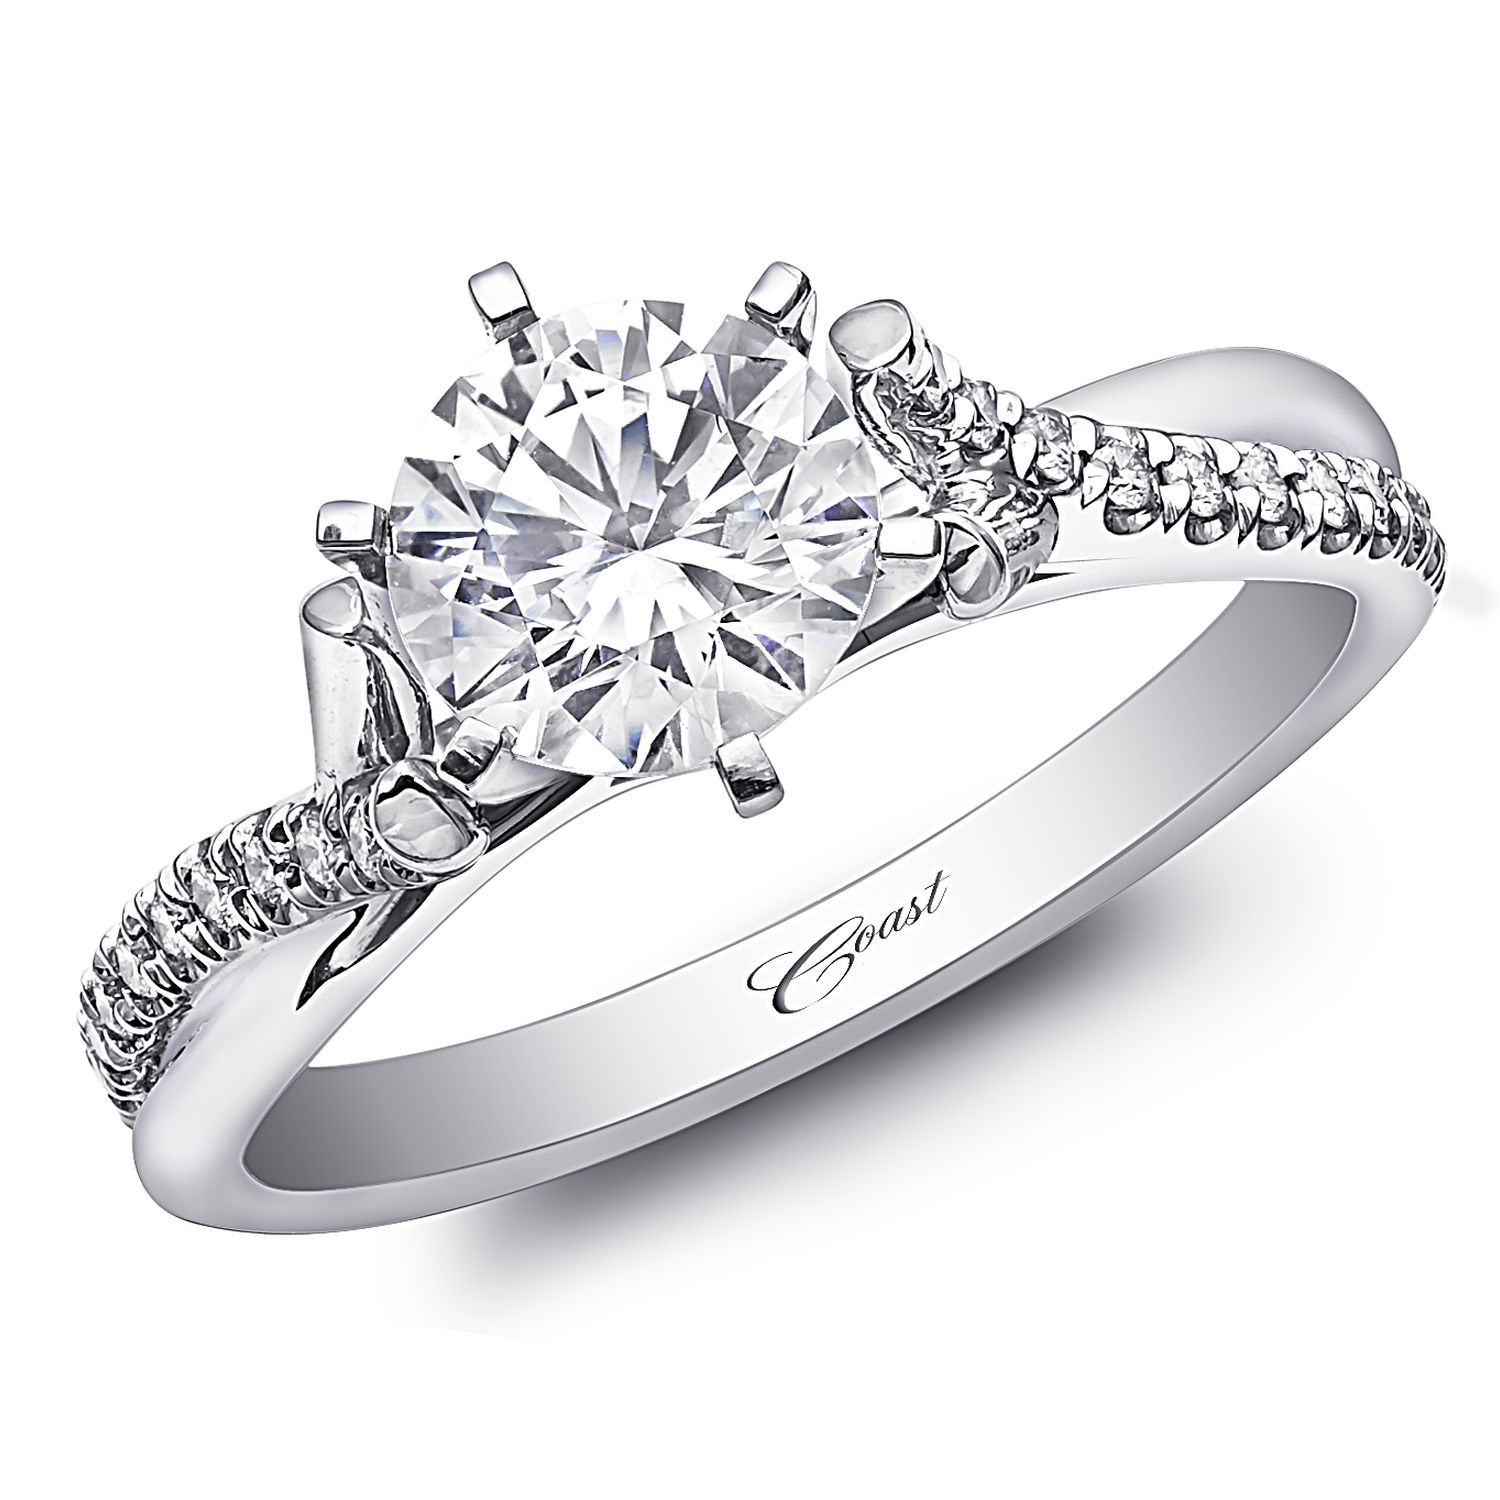 An Elegantly Tailored Engagement Ring Featuring A Twisted Shank With  Diamond Accents. Shown With A 1 Ct Center Stone. Band Sold Separately (View 24 of 25)